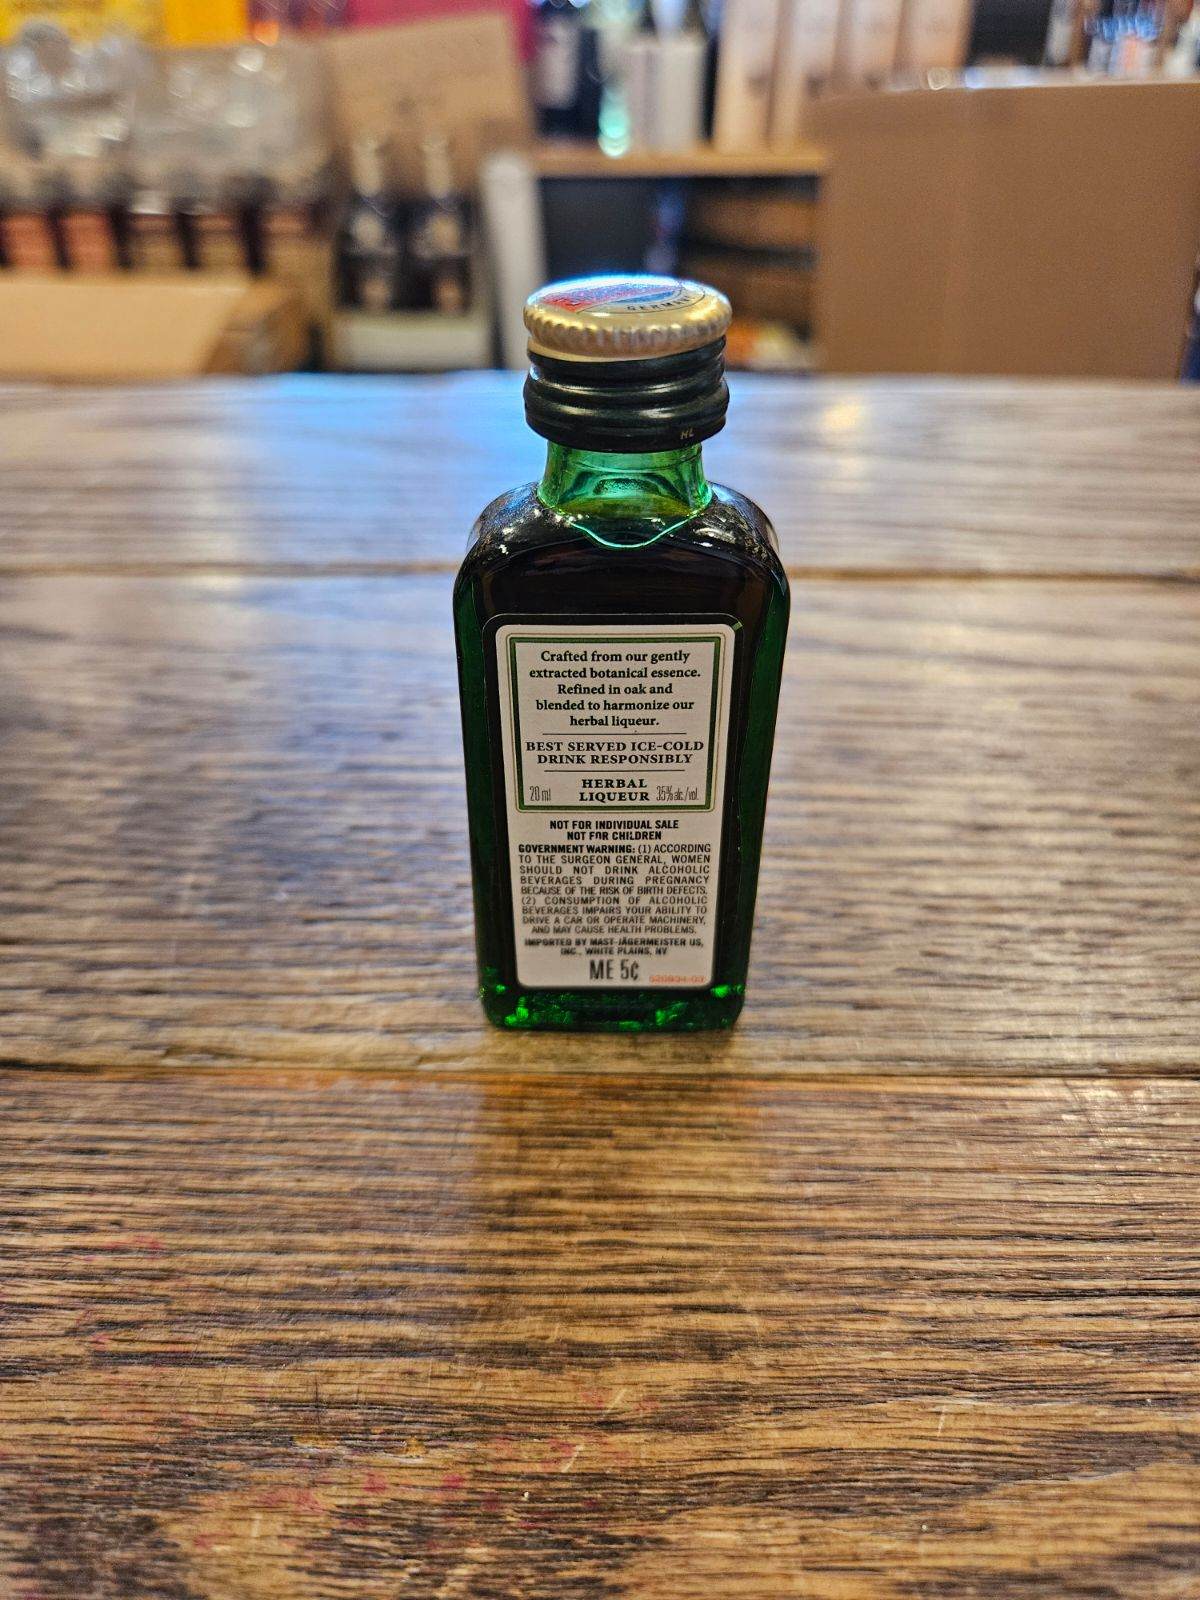 Jagermeister 20mL the backside a small flat faced squared green glass bottle with white label